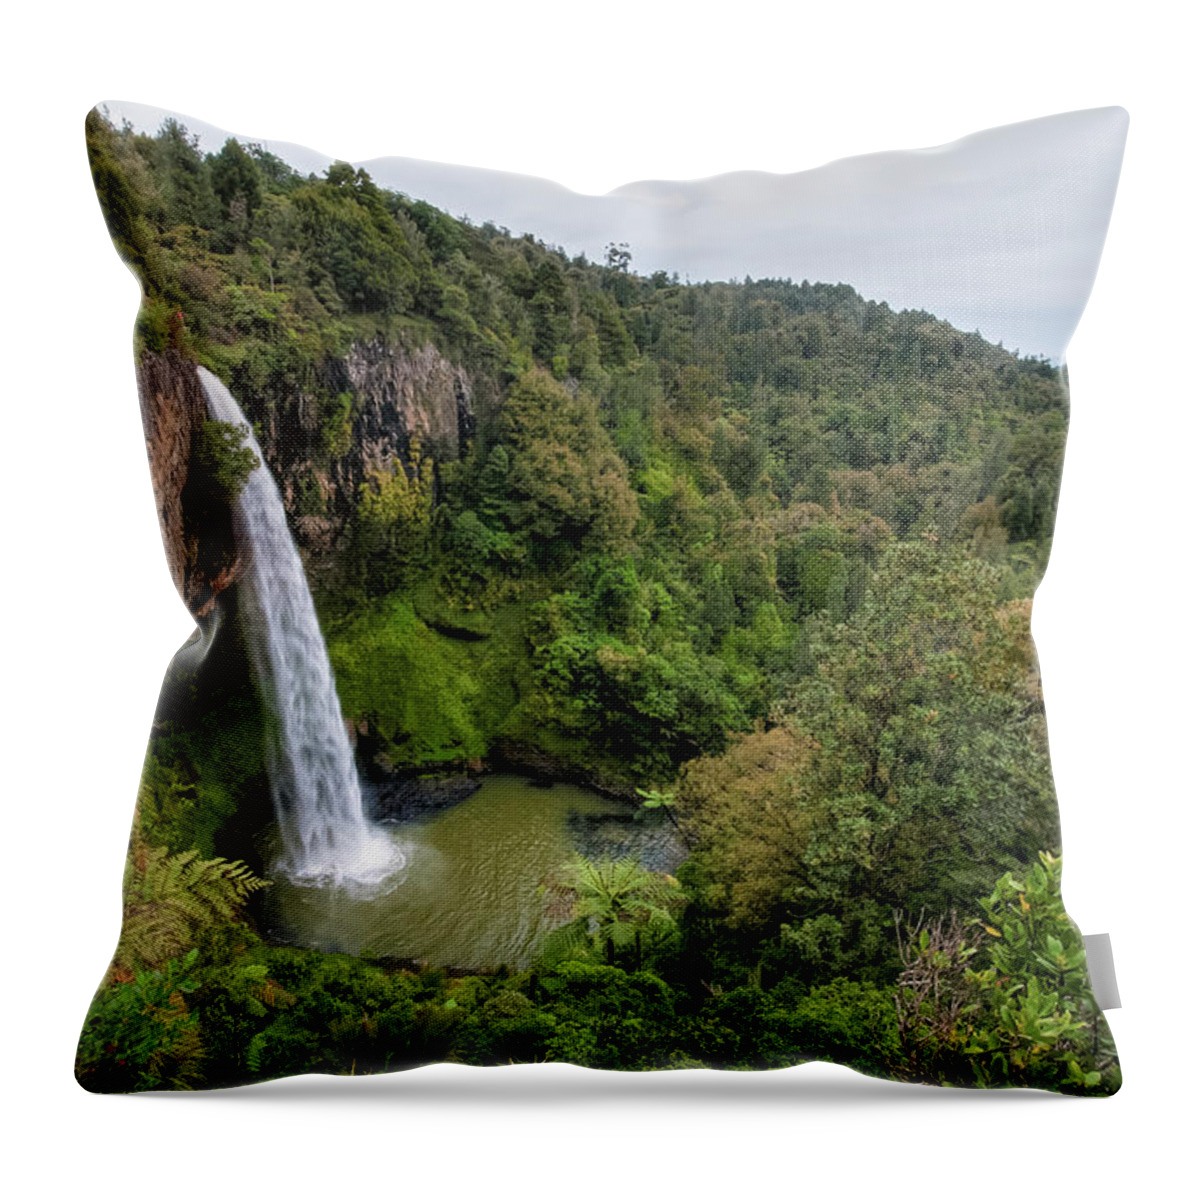 Scenics Throw Pillow featuring the photograph Bridal Veil Falls, New Zealand by Focus on nature